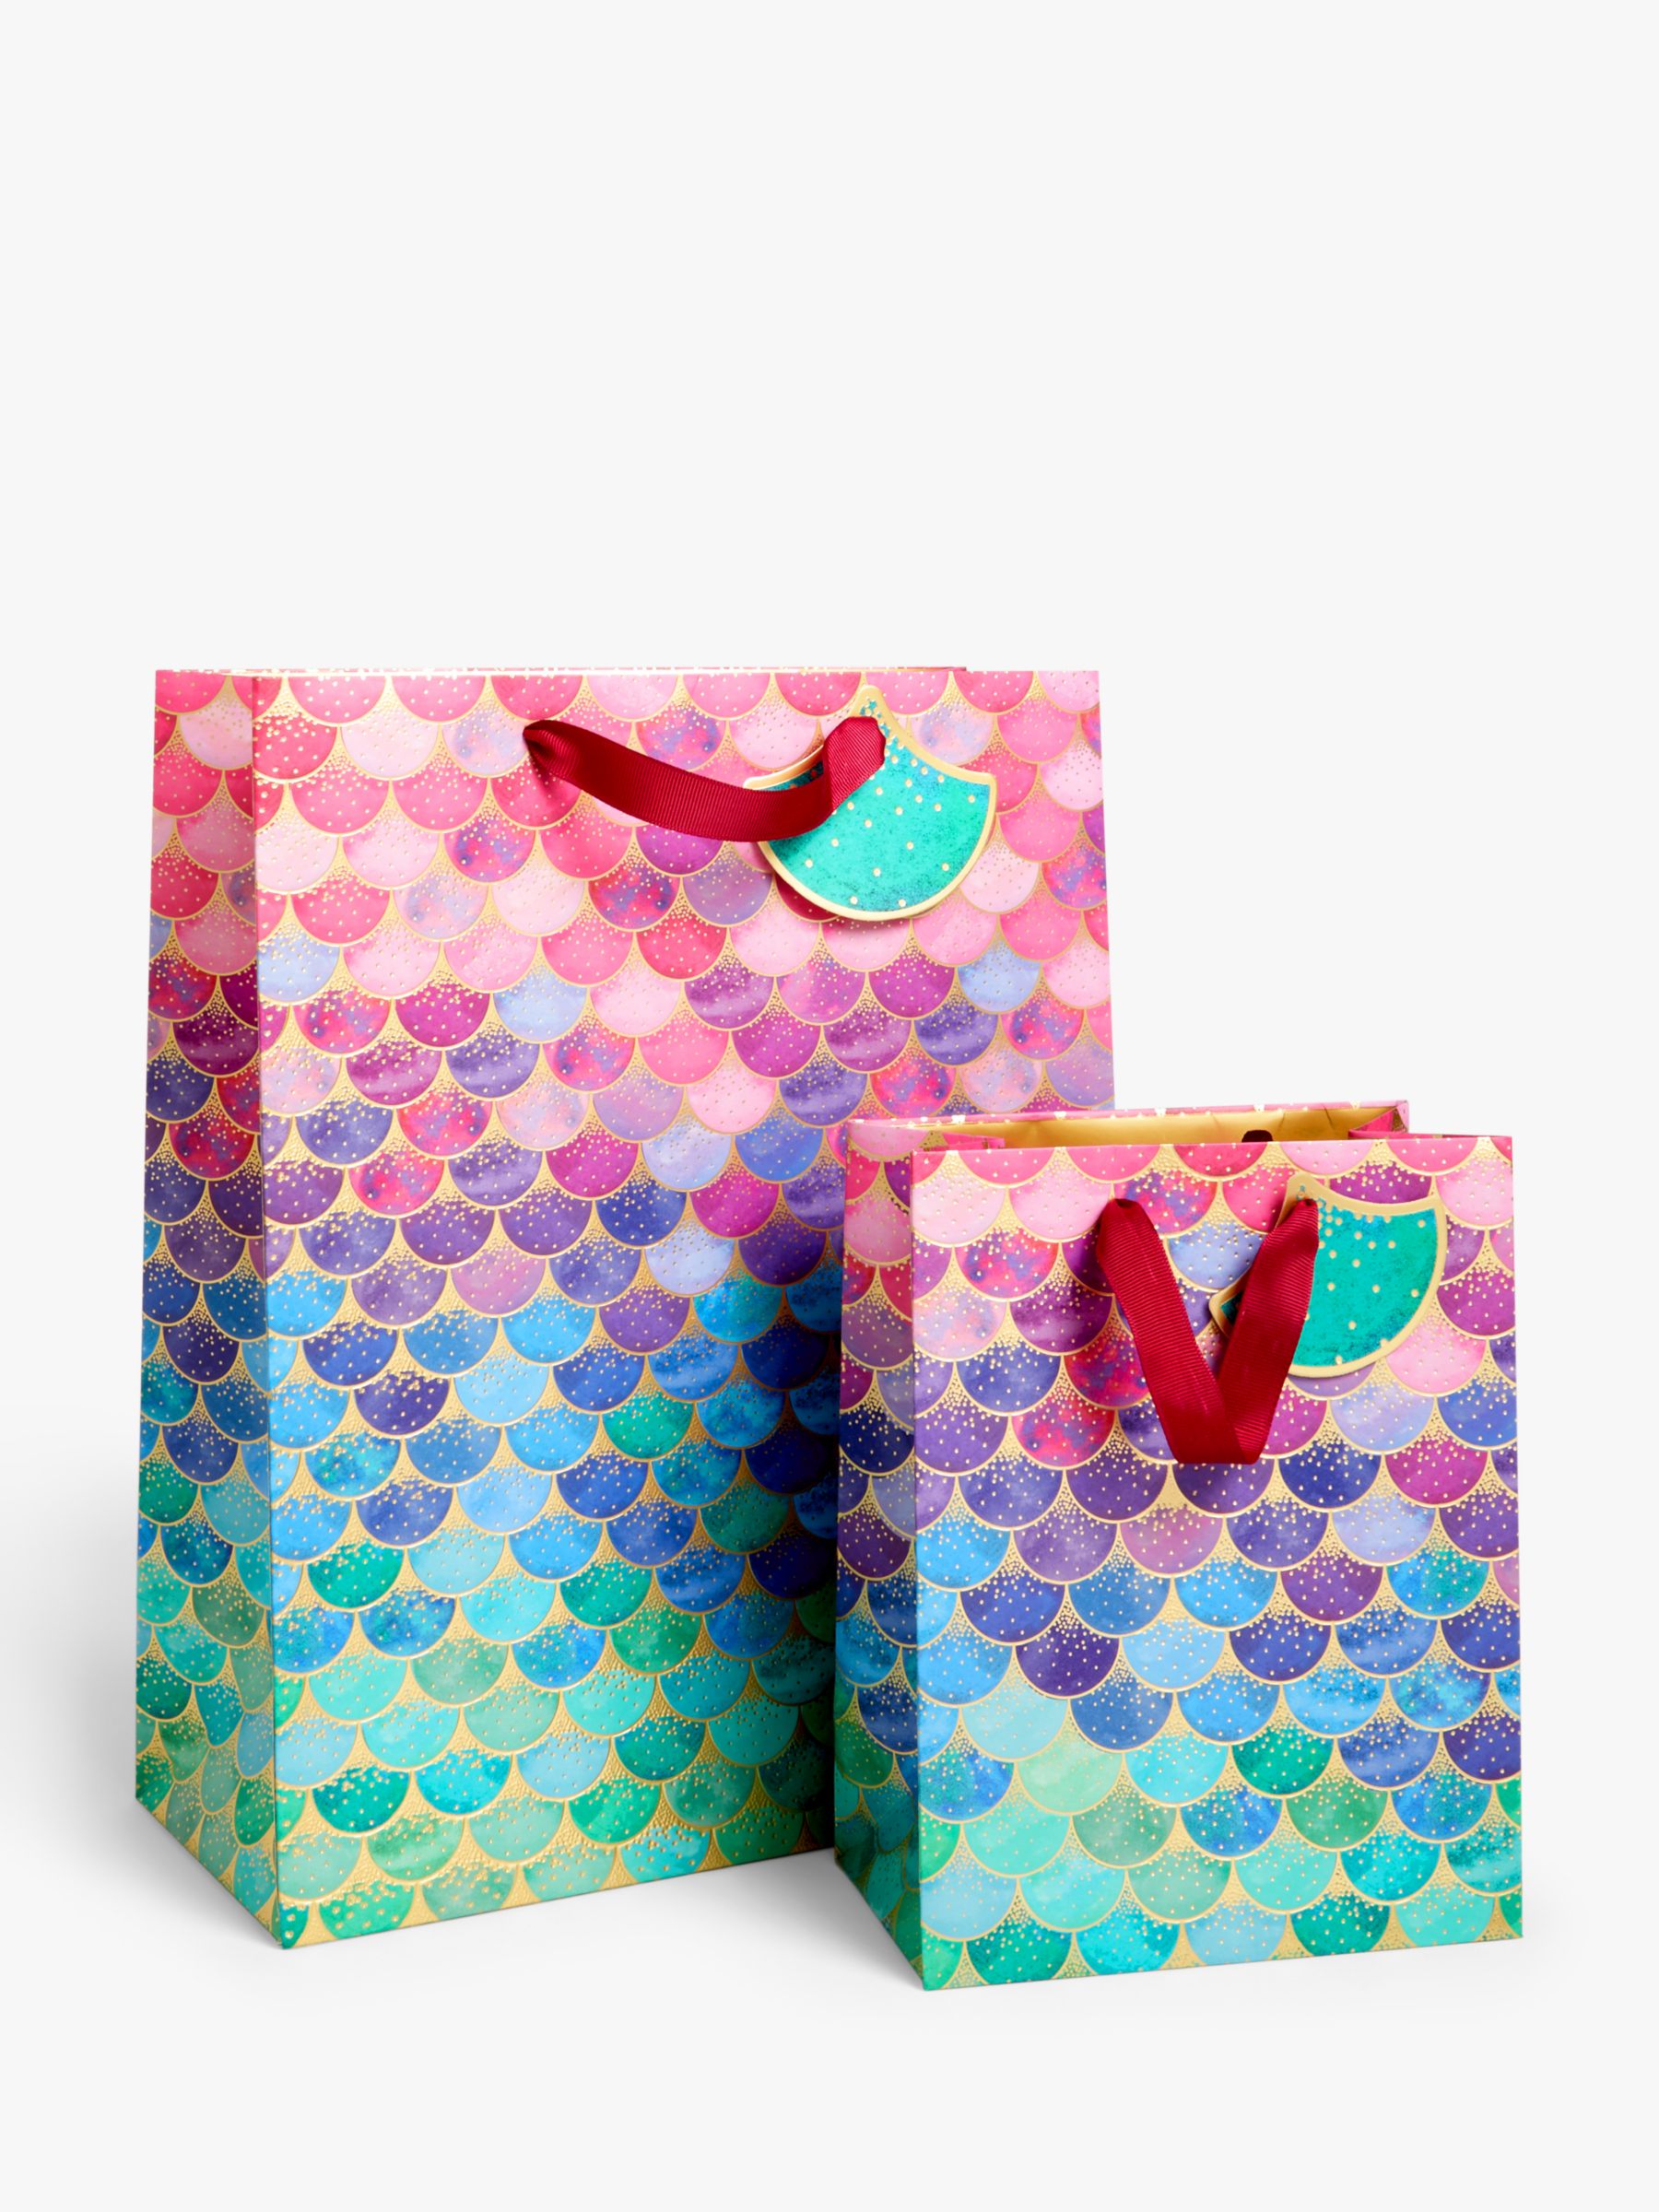 American Greetings Red Easter Gift Bags with Tissue Paper (2 Medium, 2 Small Bags, 15-Sheets)